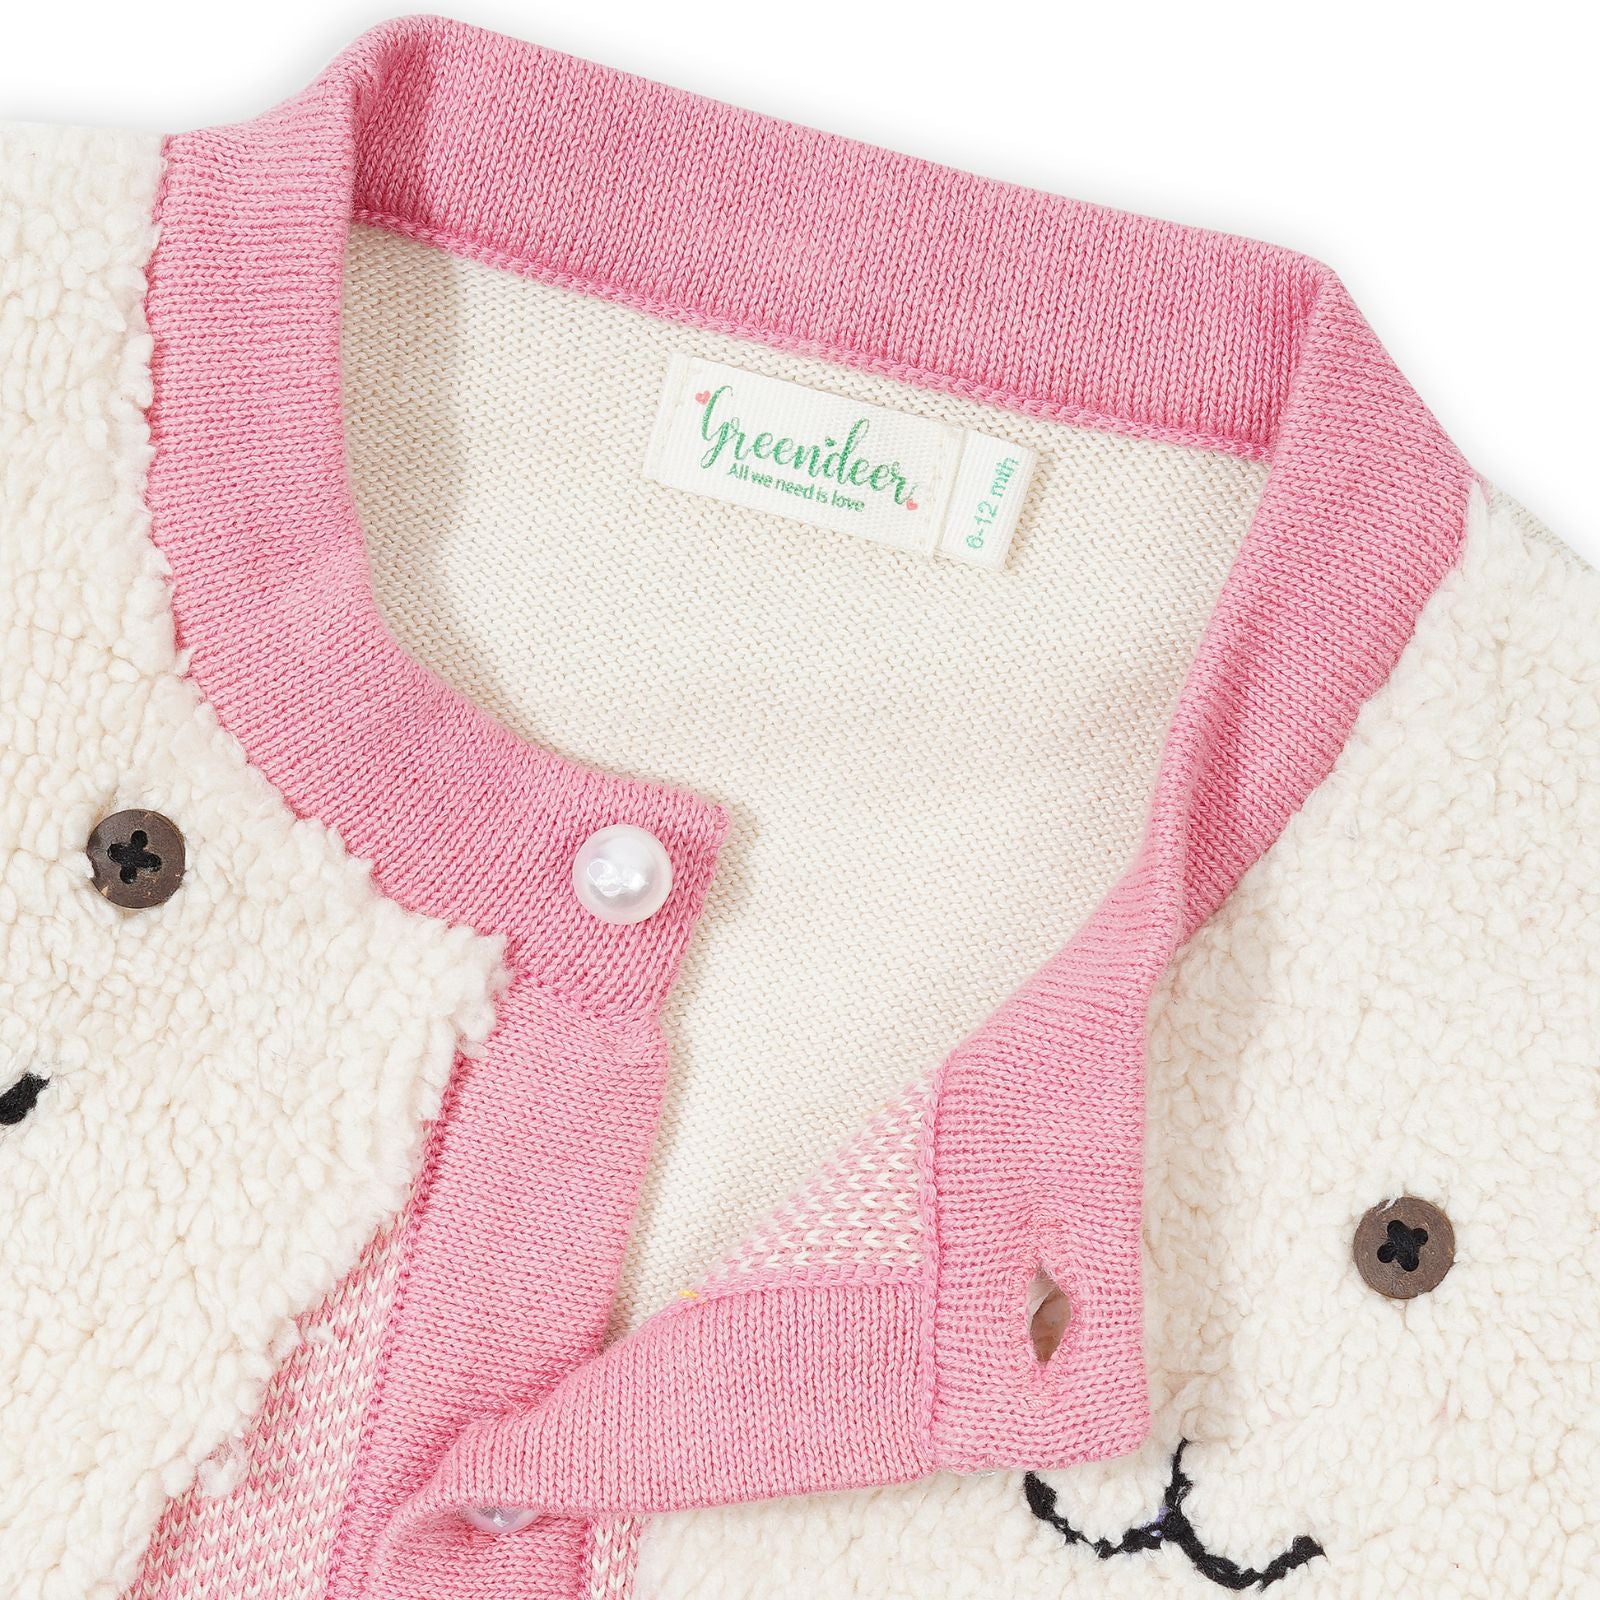 Wiskers Jacquard Sweater Set of 2 - Pink